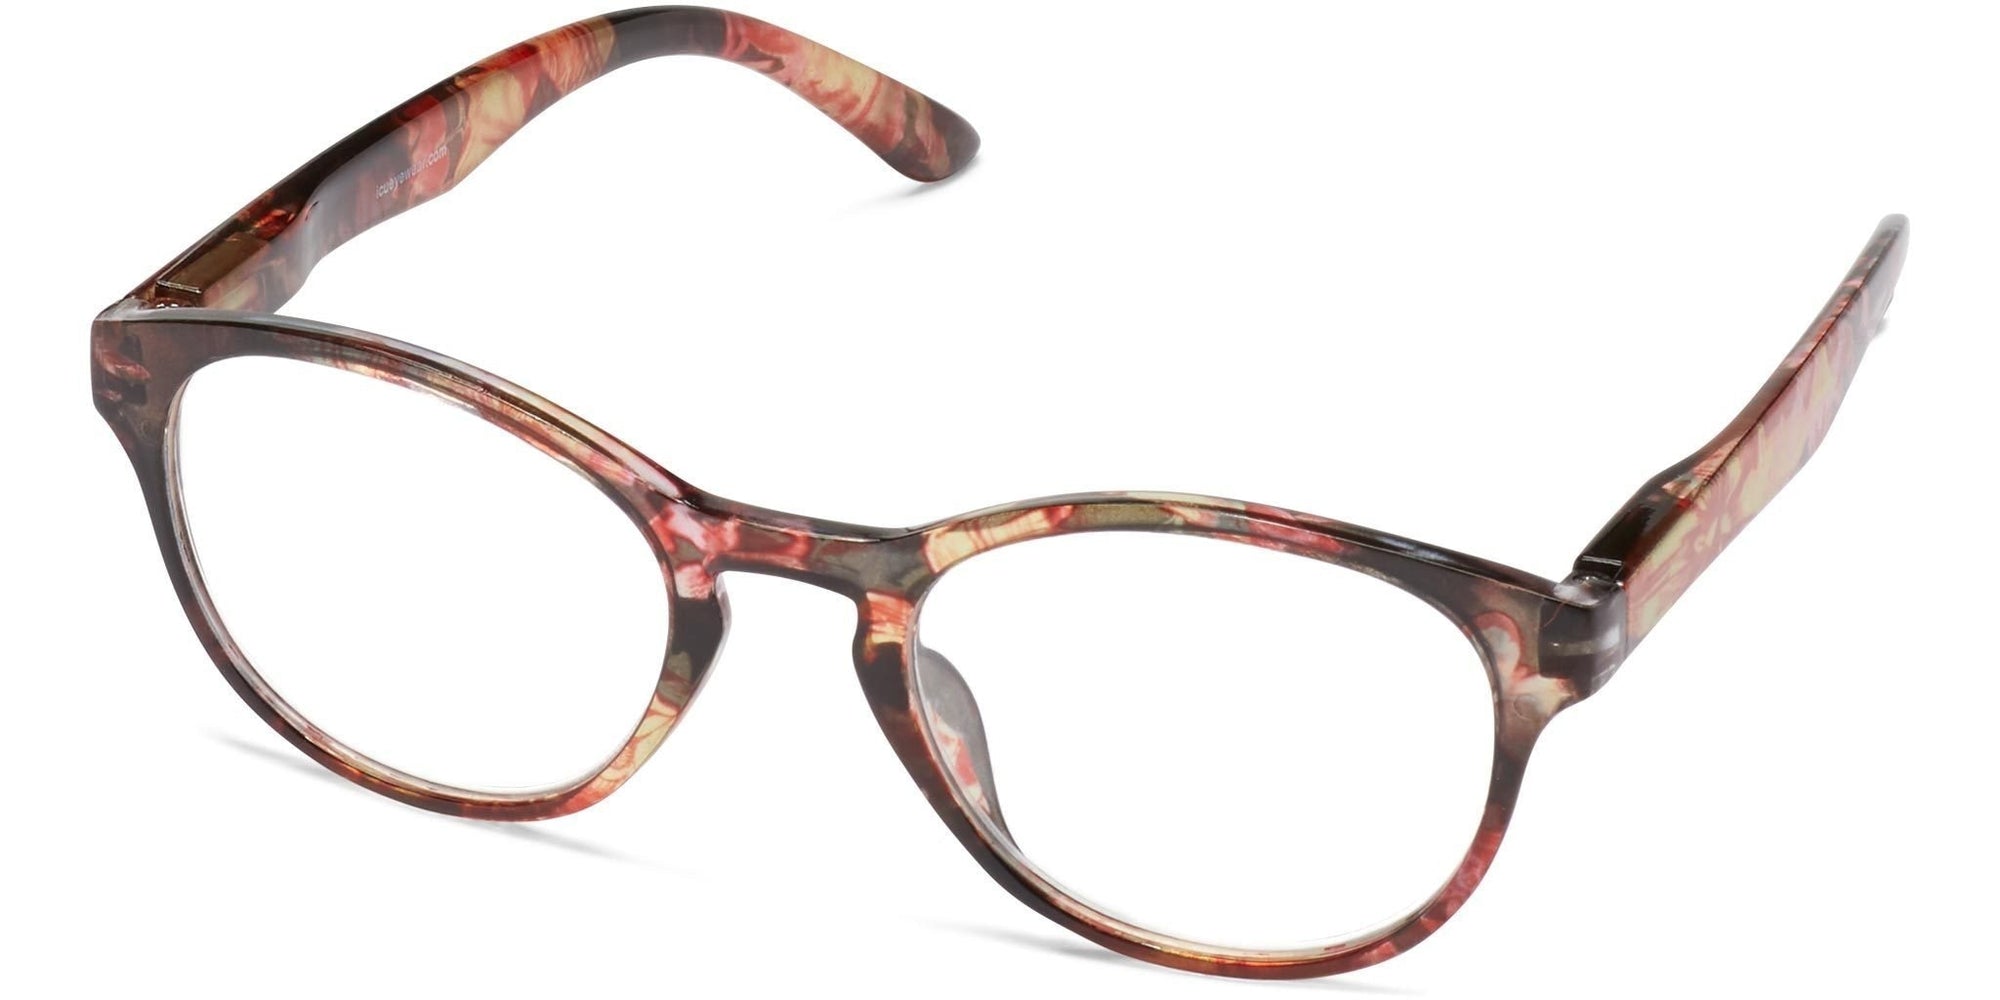 Halifax - Brown and Pink / 1.25 - Reading Glasses